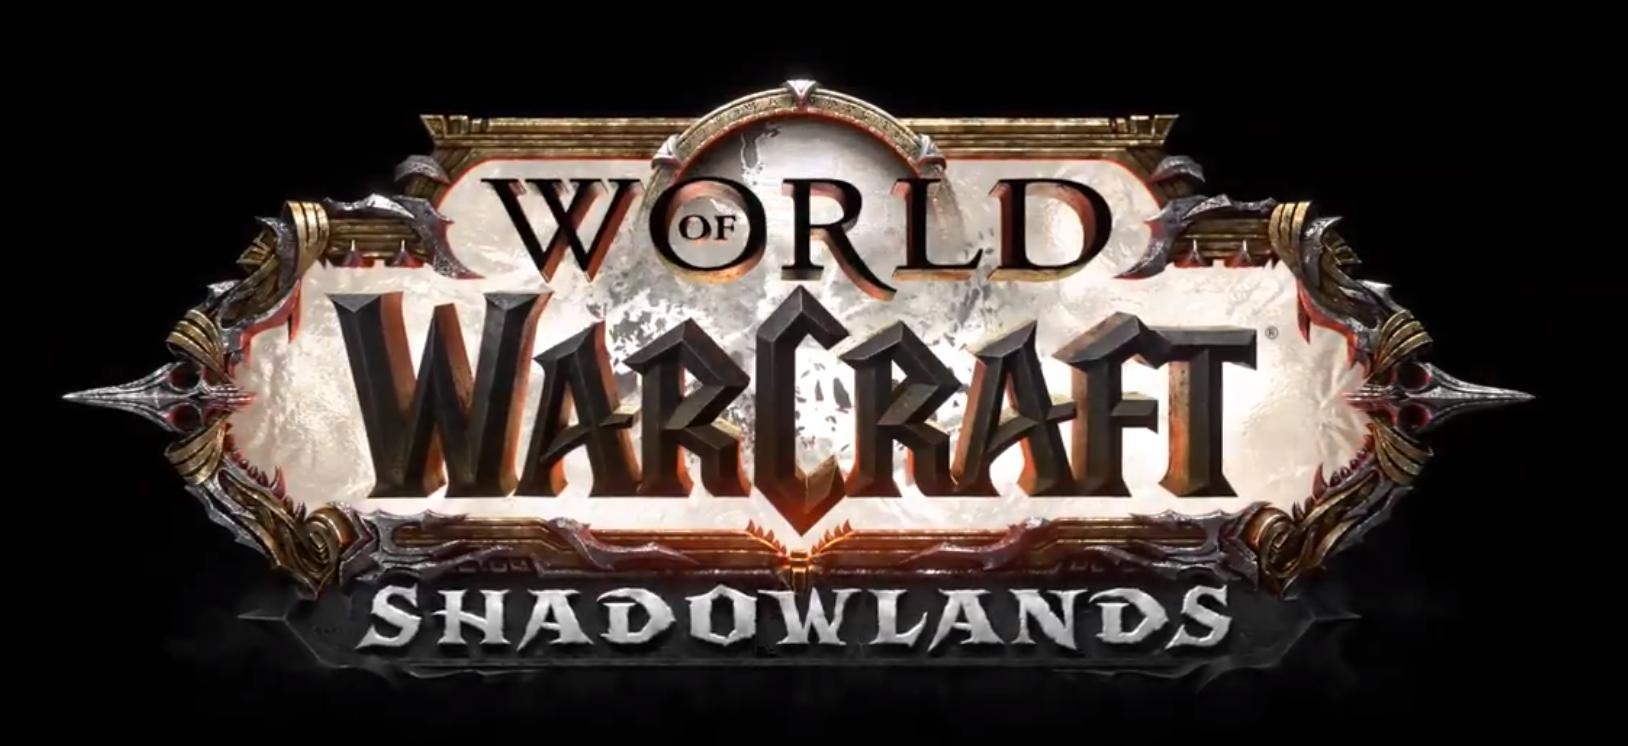 'World of Warcraft: Shadowlands' will now release November 23